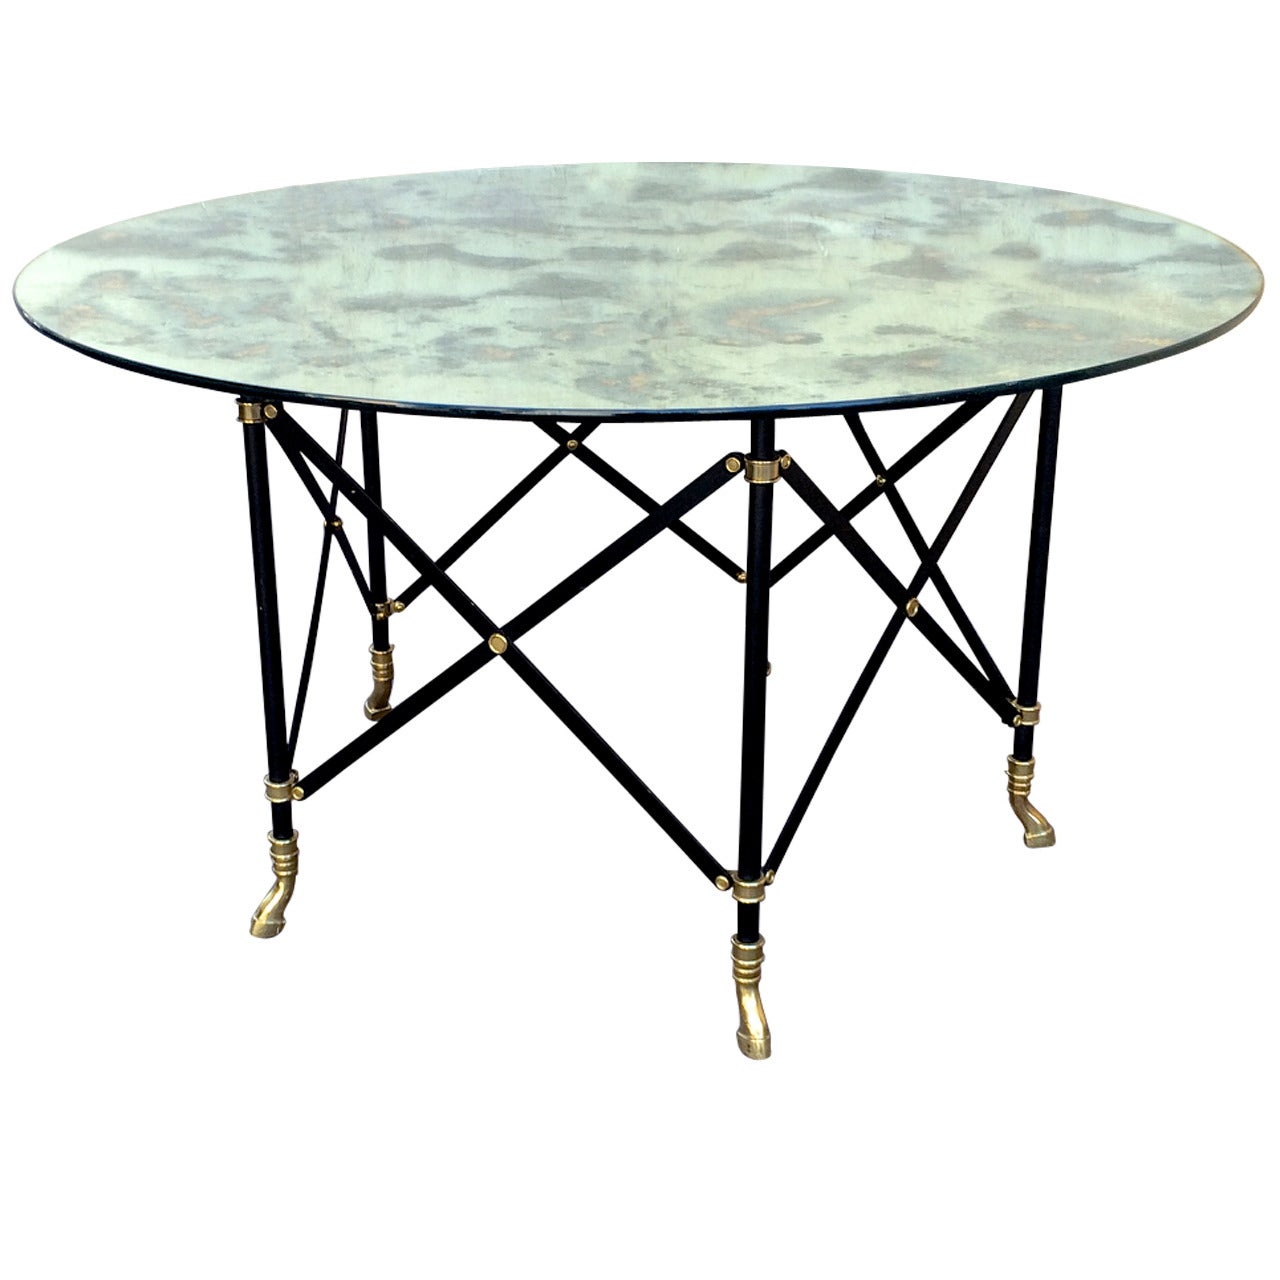 Maison Jansen Round Dining Table with a Thick Eglomized Mirror Top For Sale